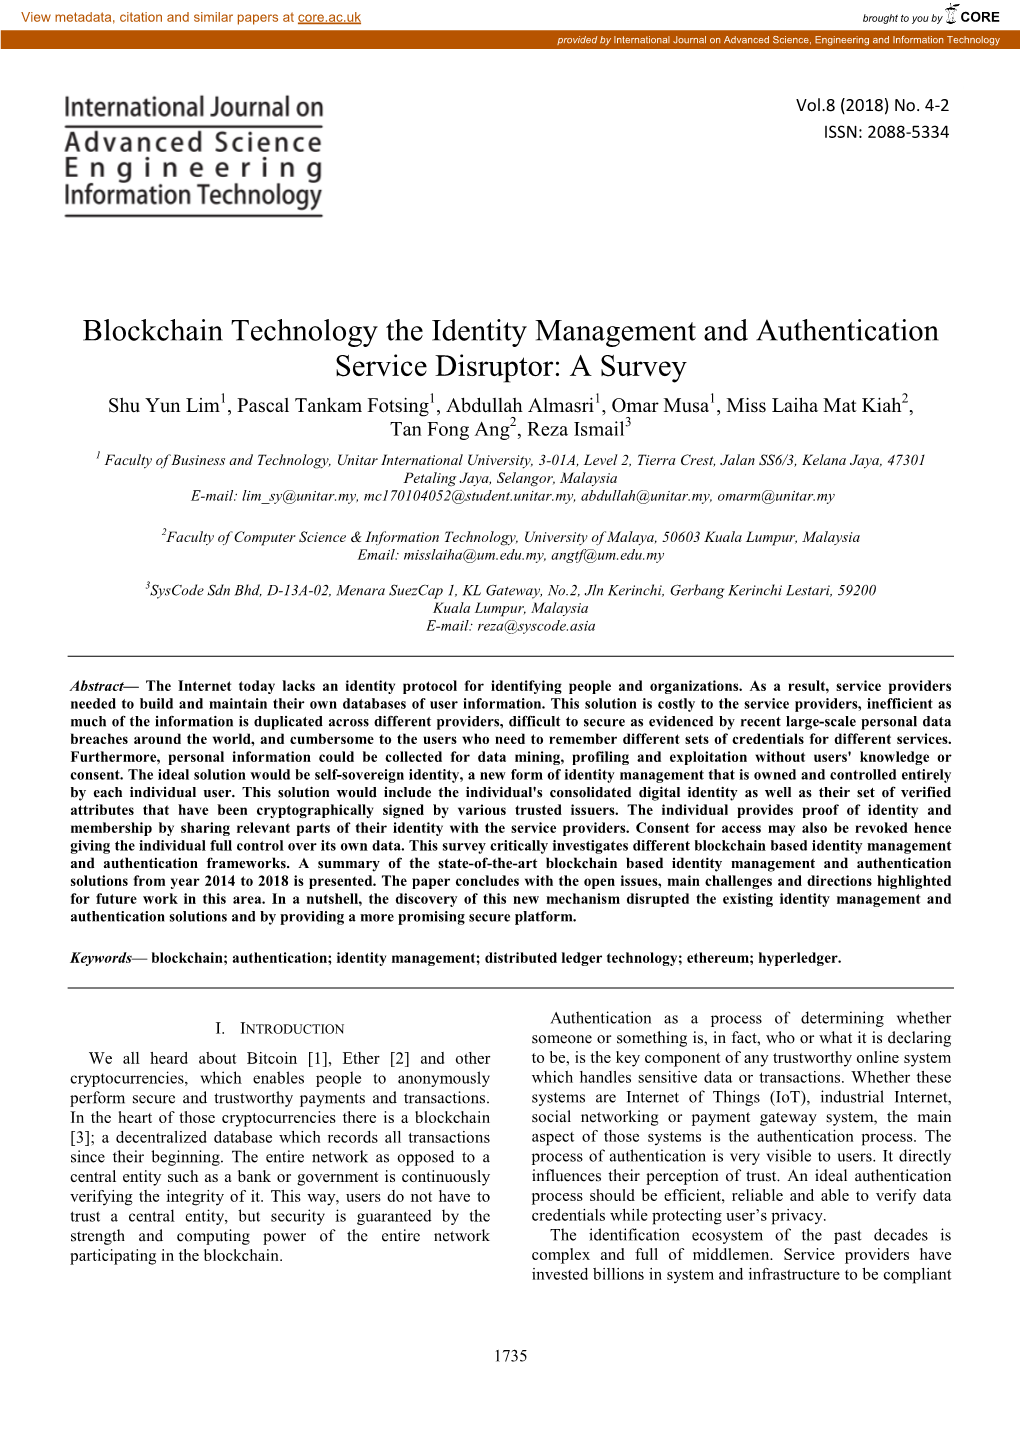 Blockchain Technology the Identity Management And